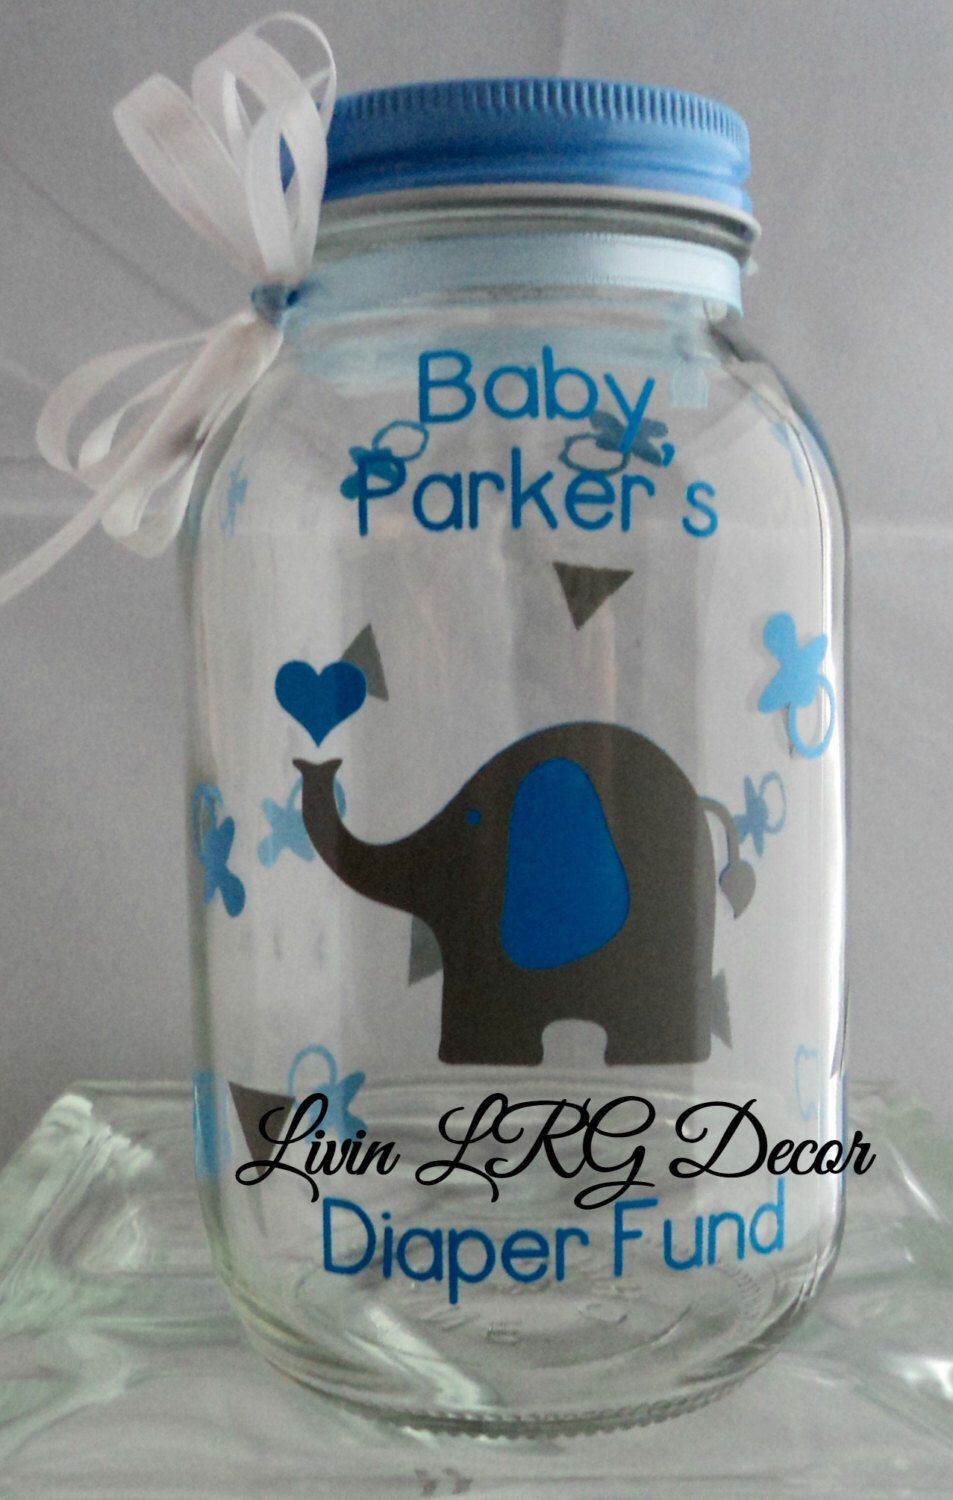 Mason Jar Gift Ideas For Baby Shower
 Pin by Deonna Ralls on shower ts